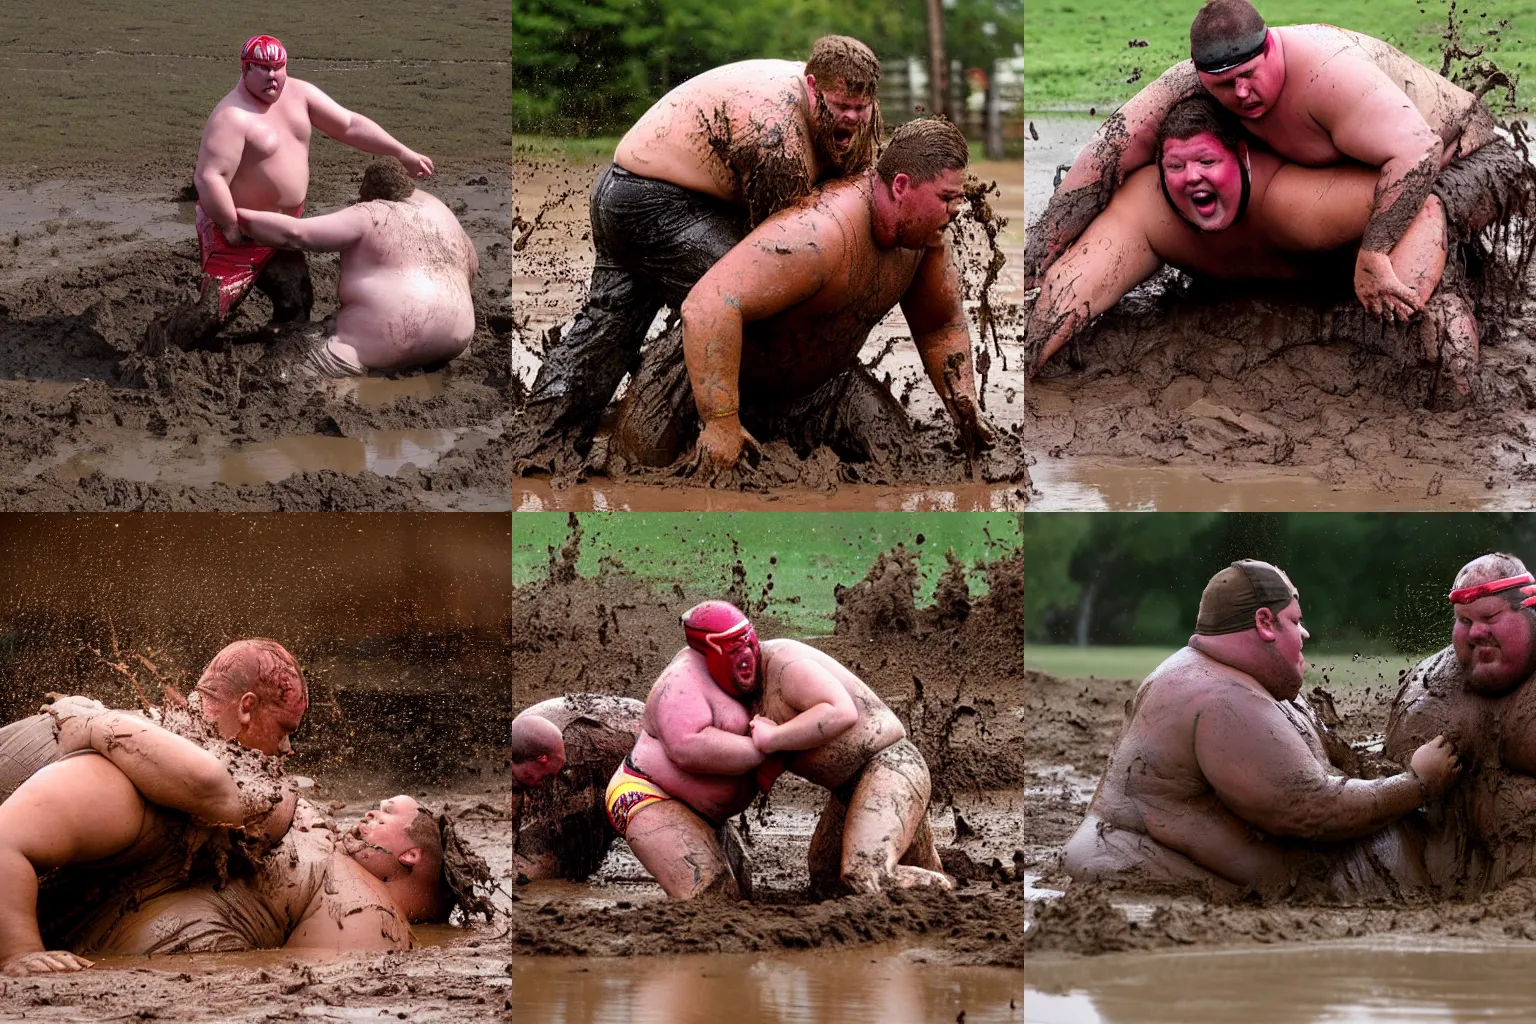 Prompt: flash photograph of two gigantically fat rednecks wrestling in a mud pit